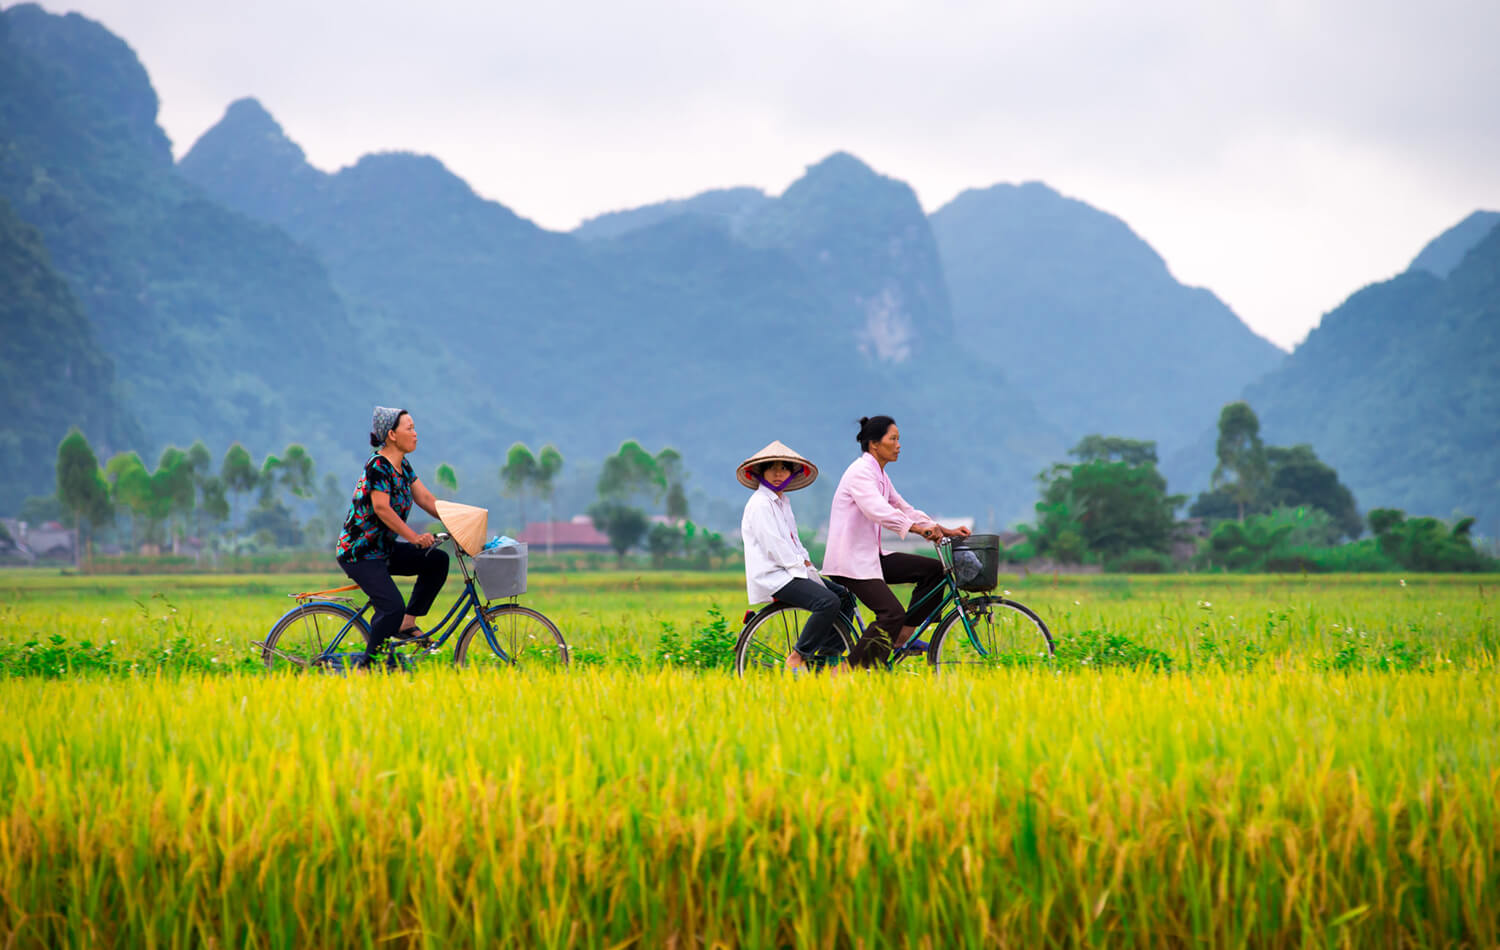 6 reasons to ride a motorcycle in Vietnam - friendly locals